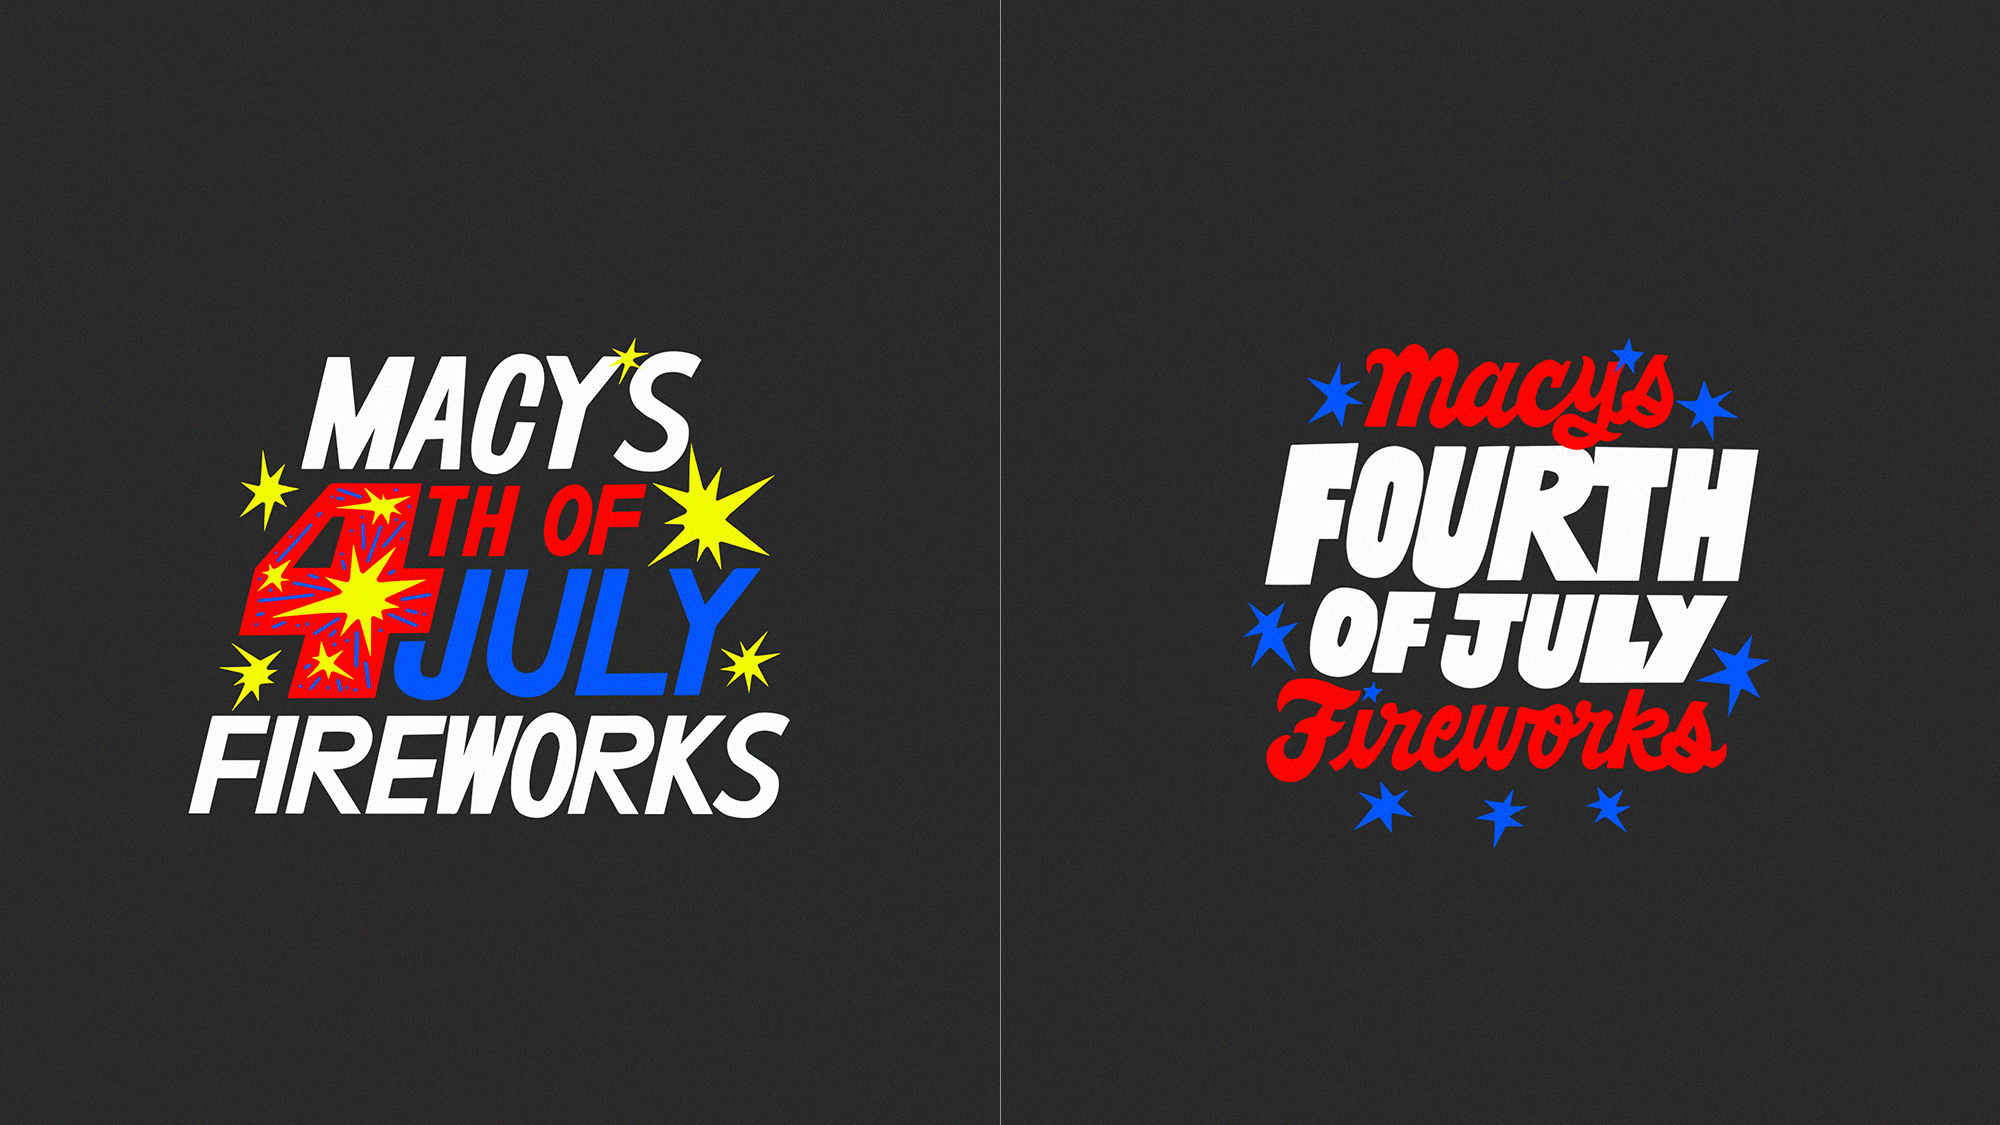 Brand New New Logo and Identity for Macy’s 4th of July Fireworks by